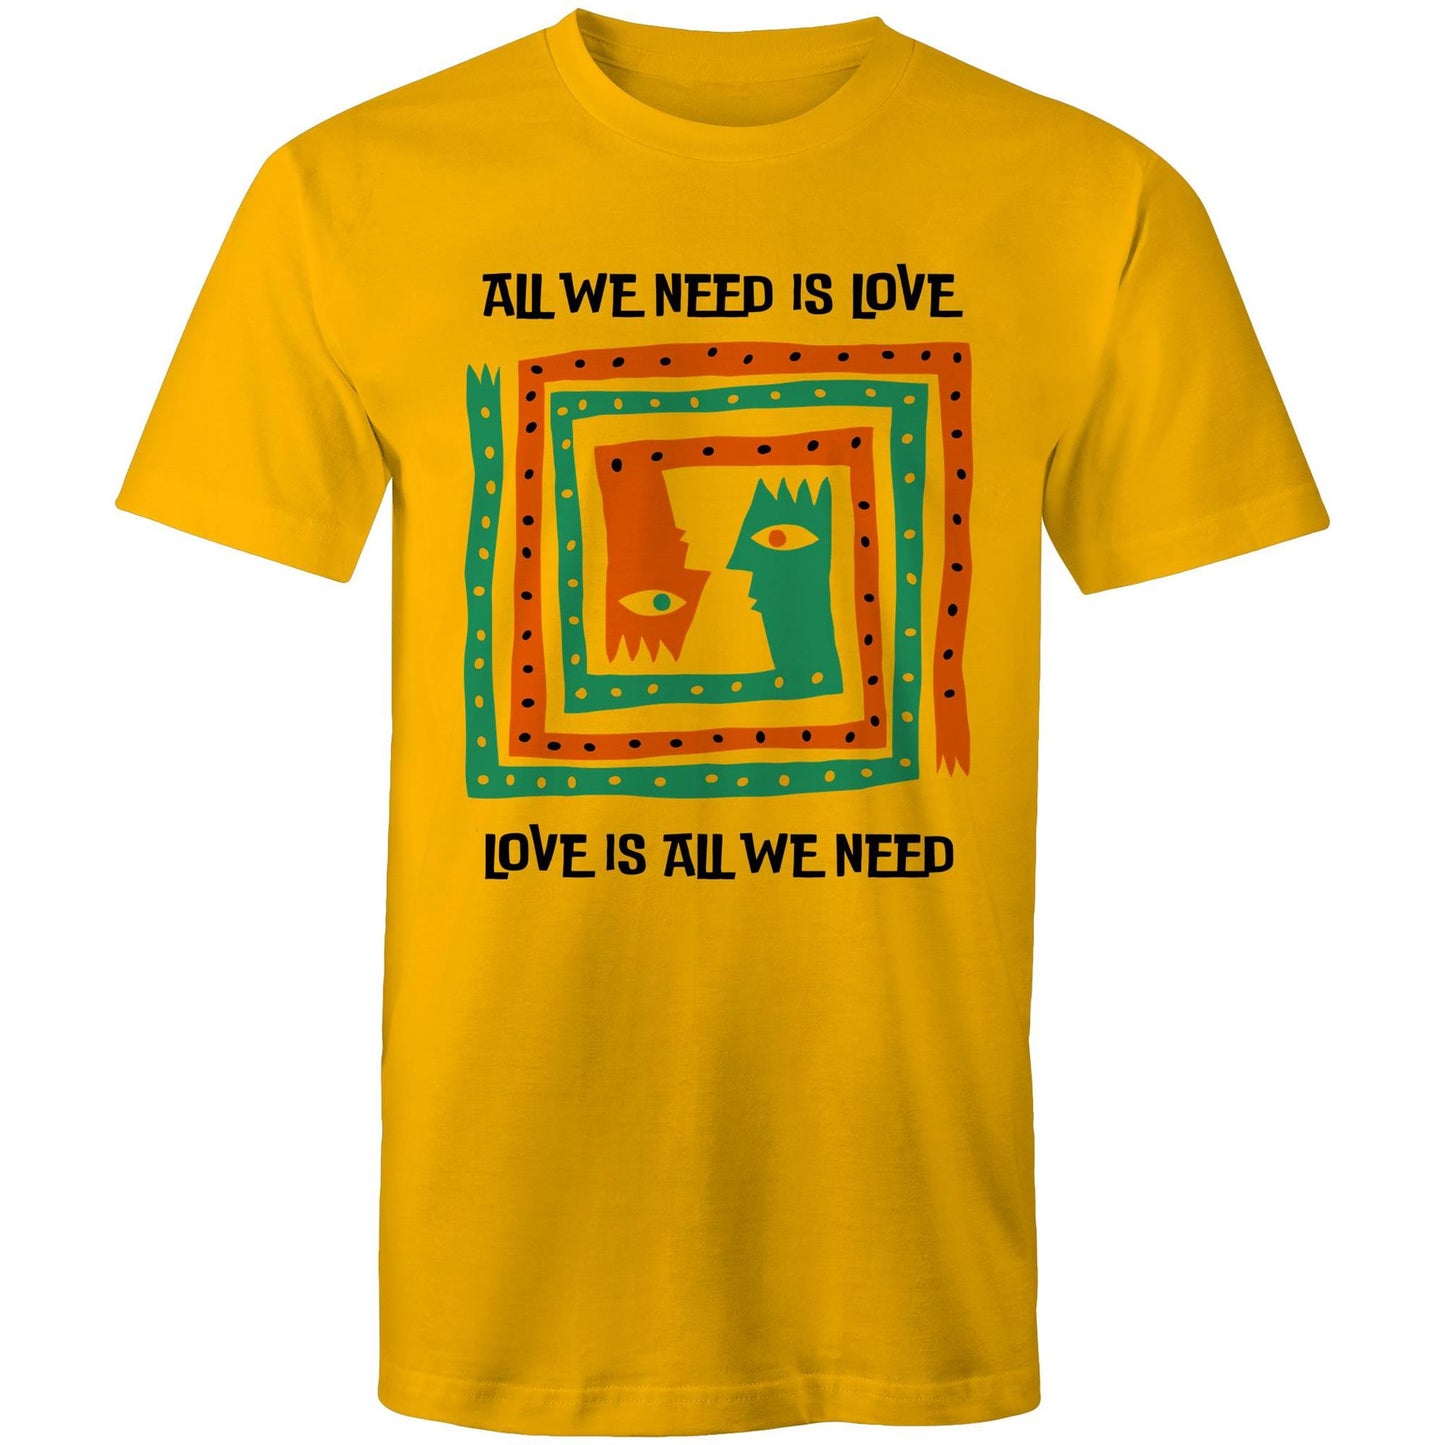 All We Need Is Love - Mens T-Shirt Gold Mens T-shirt